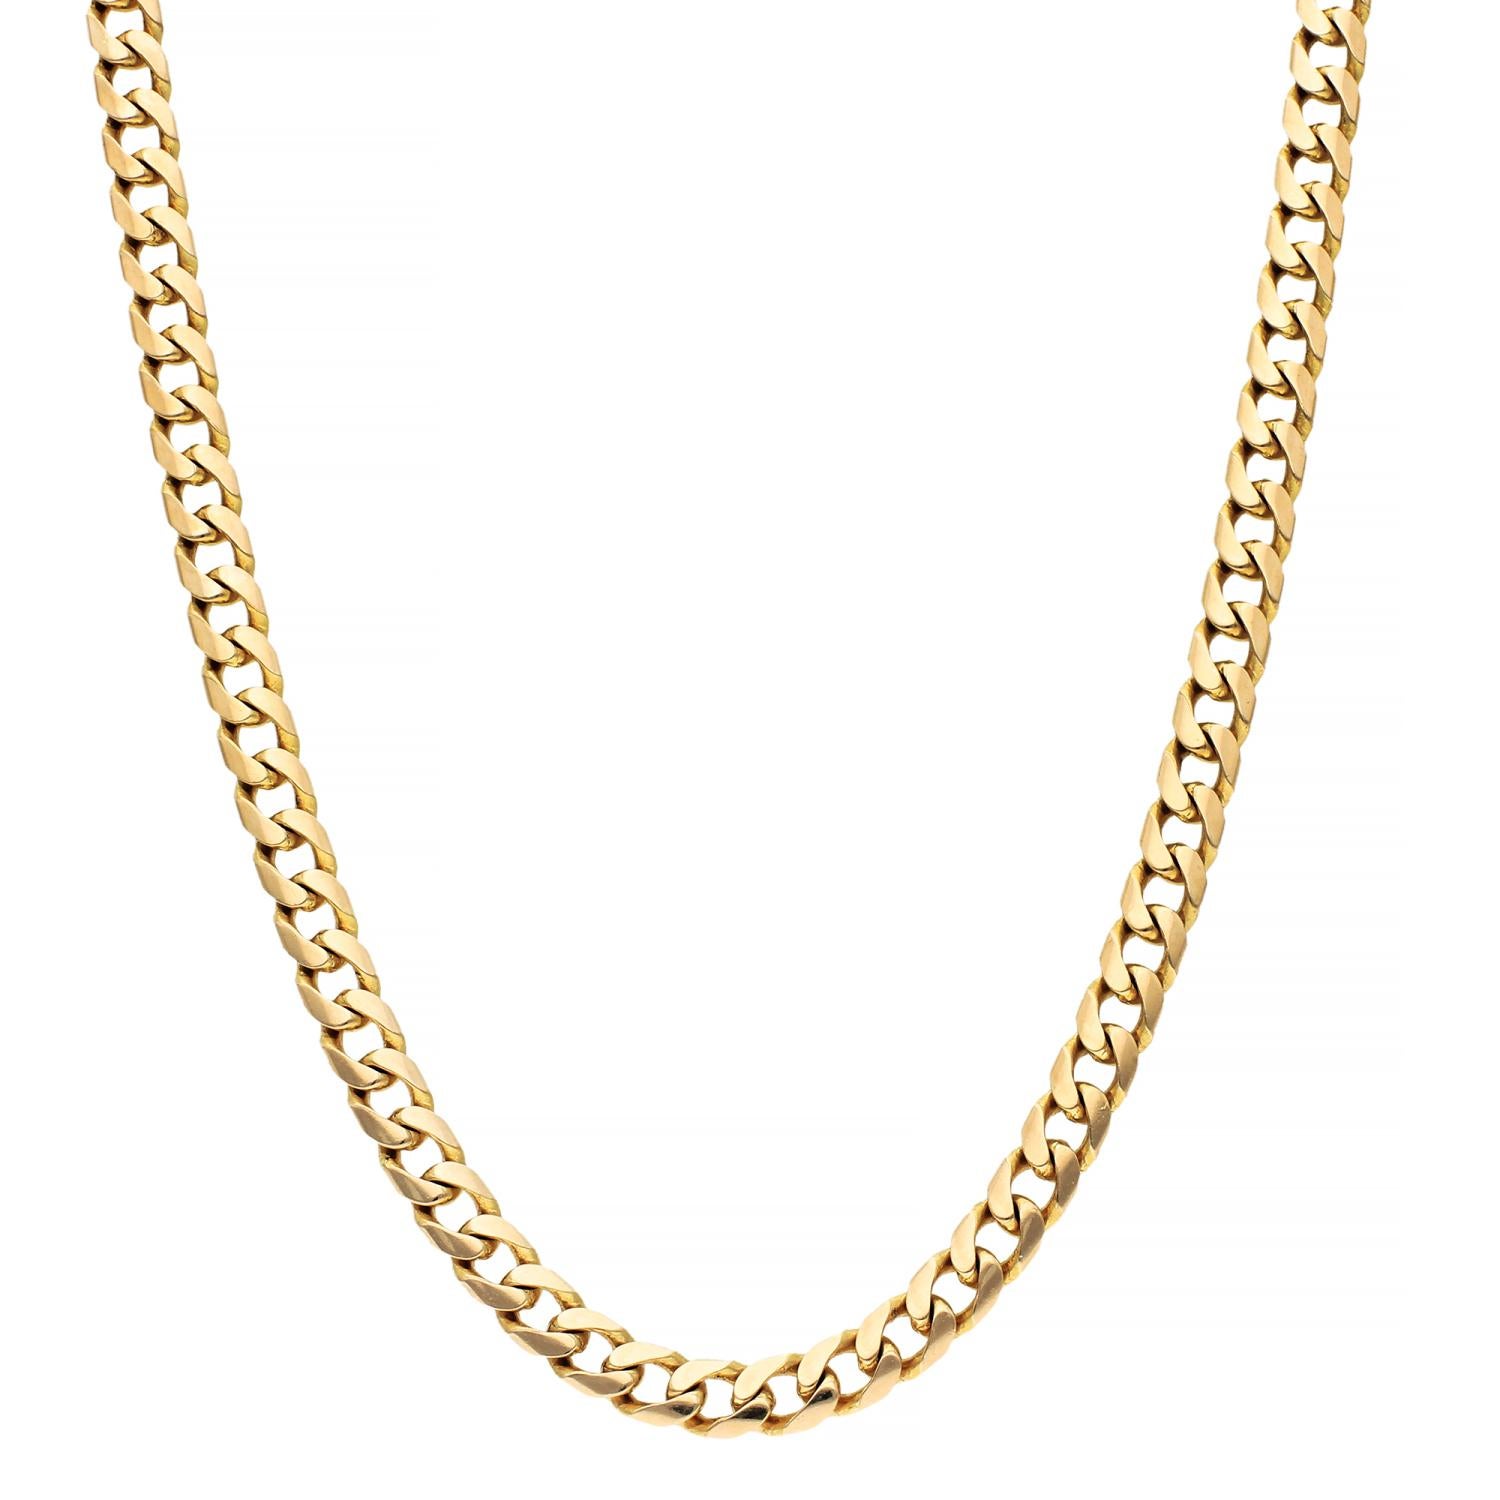  9ct Yellow Gold Filed Curb 22 Inch Chain - 36.4 Grams  For Sale